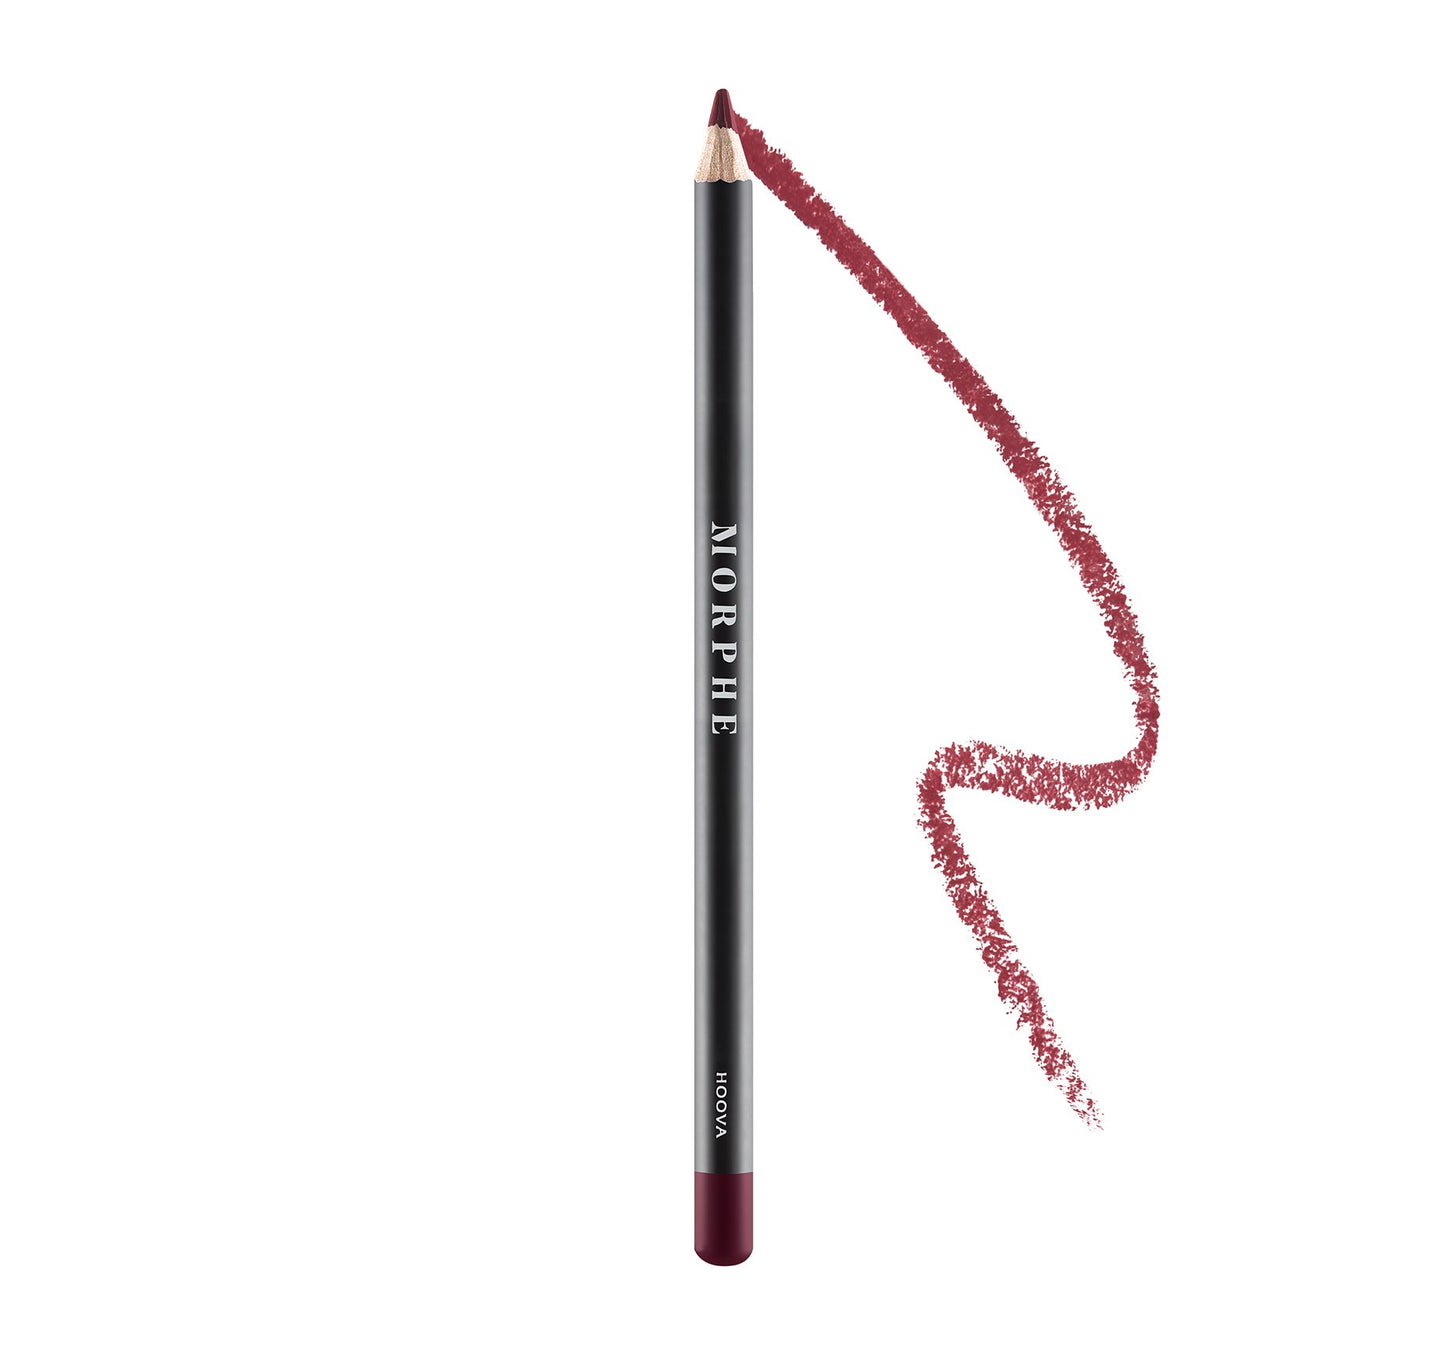 Morphe Color Pencil - Hoova (Creamy Burgundy) 1.5g This creamy Color Pencil contain powerfully pigmented colour that glides on and slays on.  From on-point neutrals to beyond-bold gems, you’ll never run out of ways to line and define your eyes and lips. Go on and draw some attention your way.